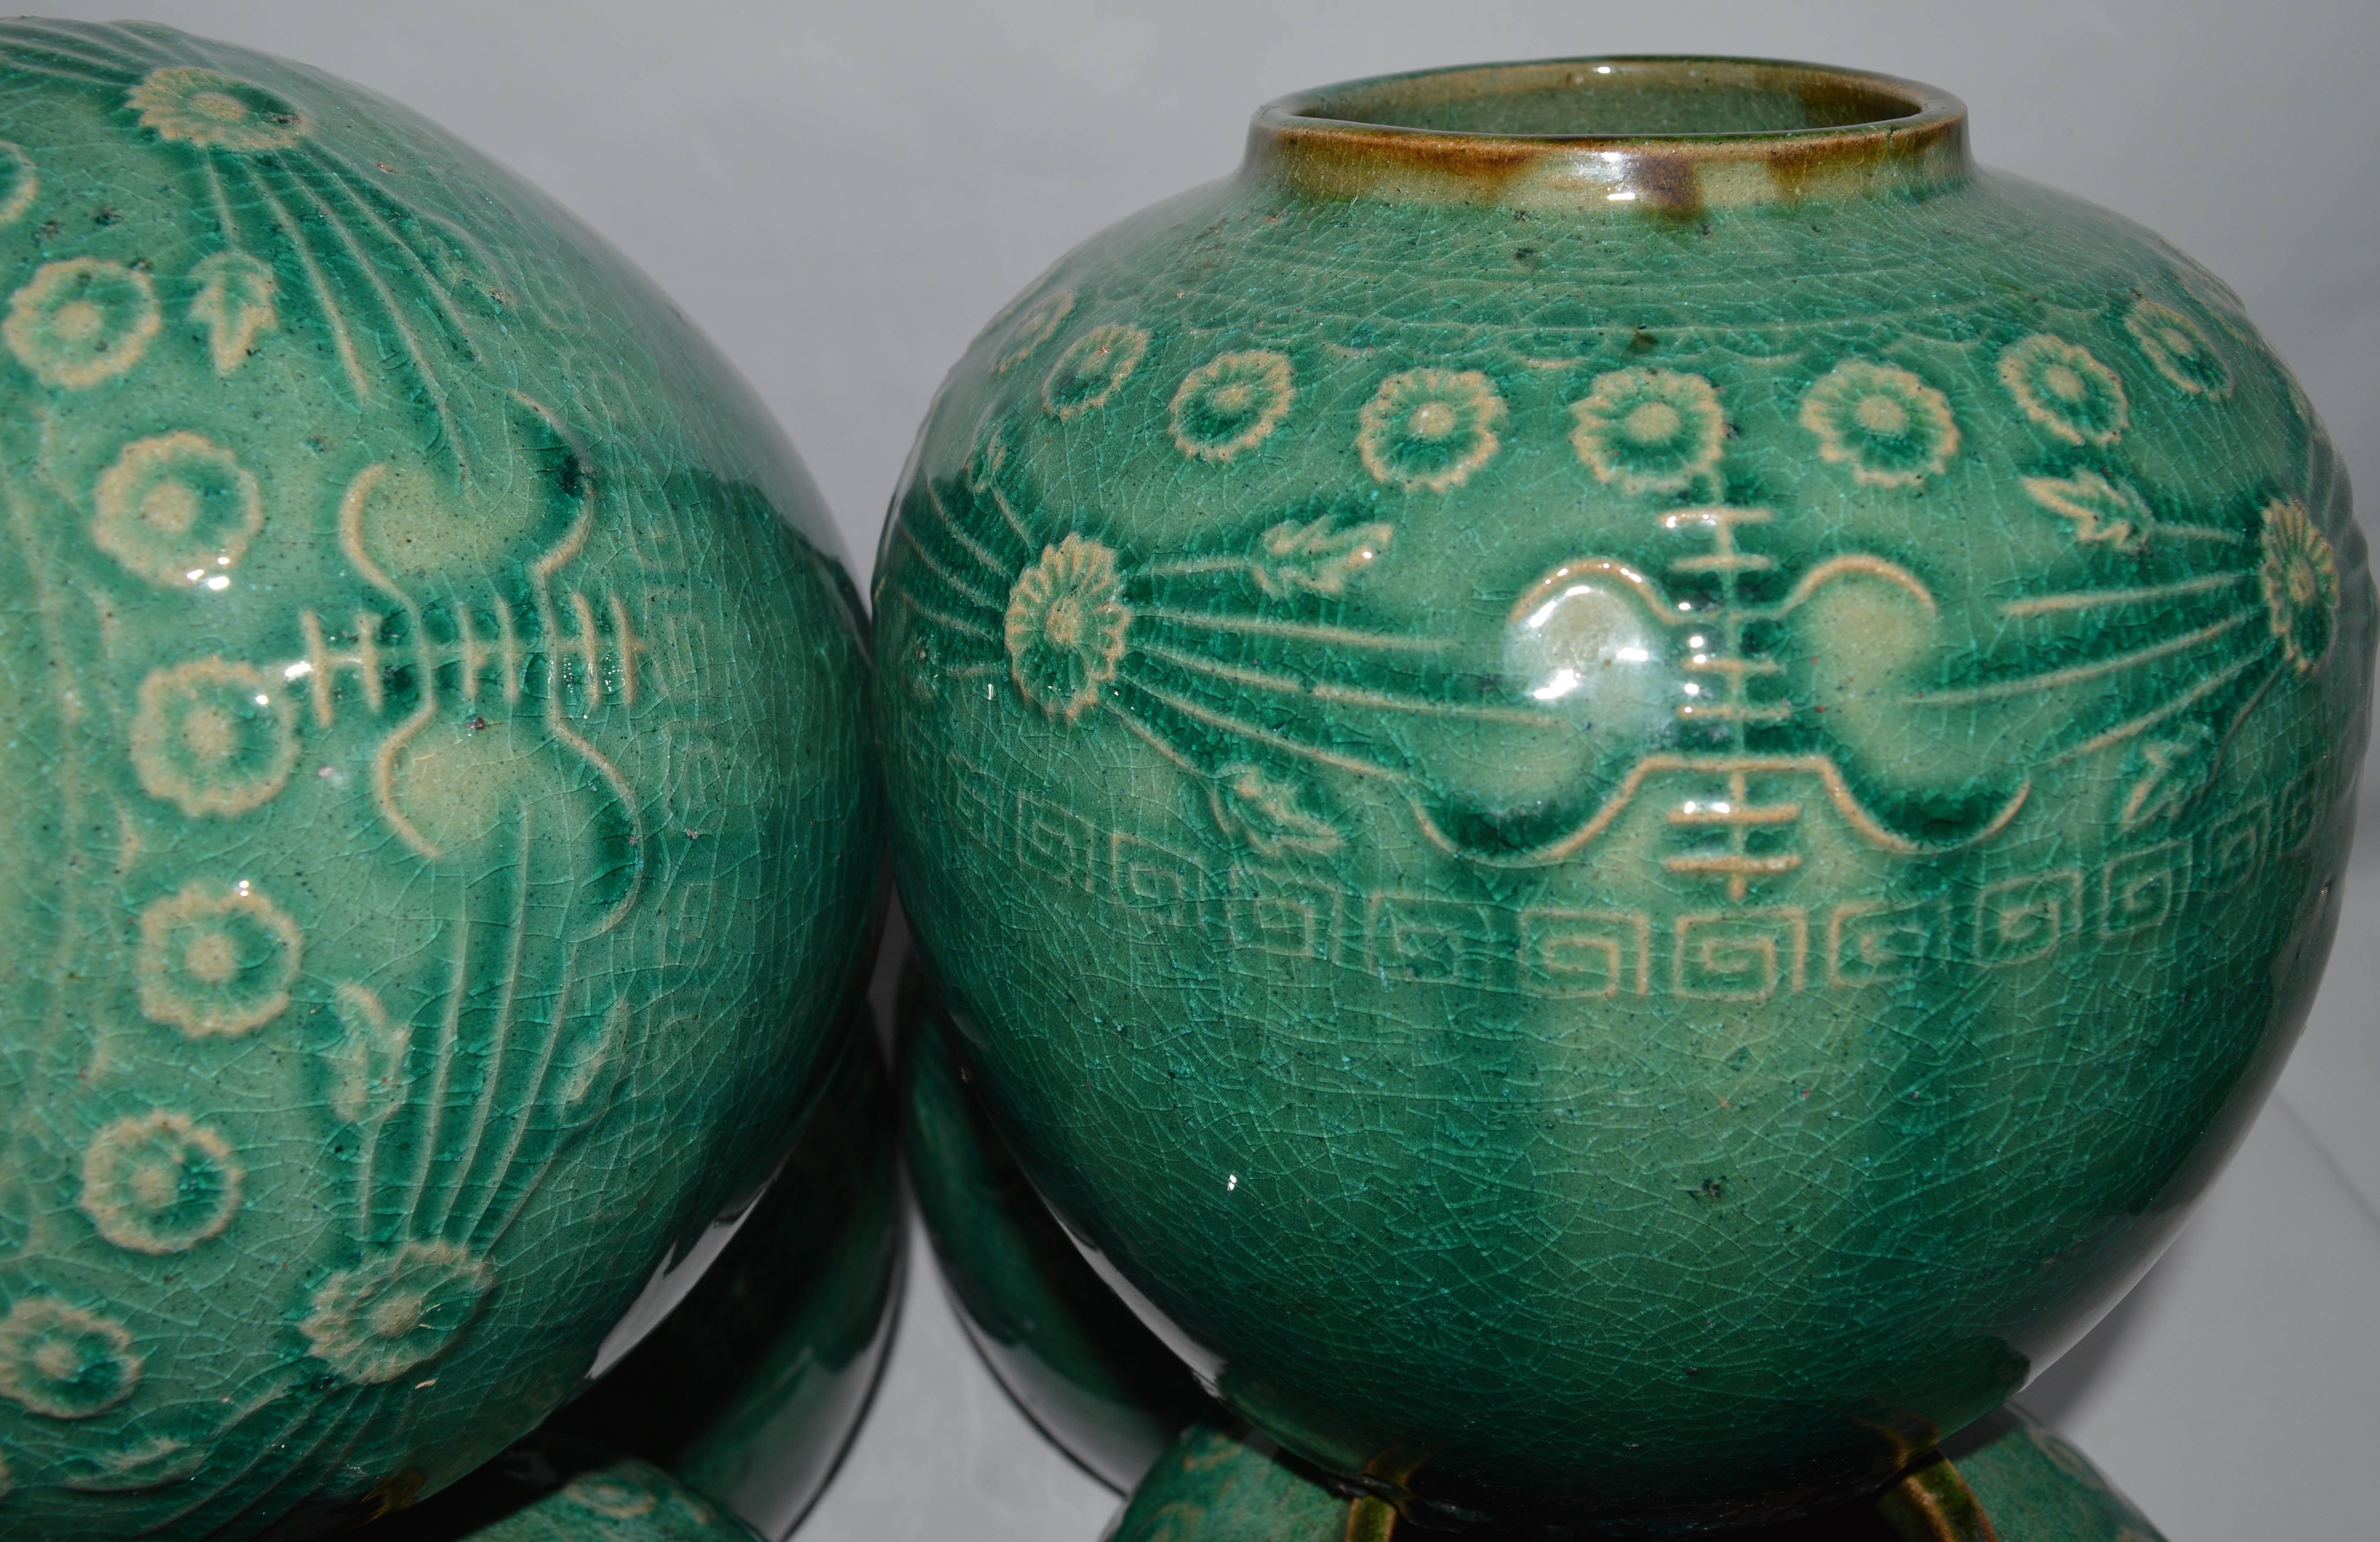 Late 19th century Chinese merchants ginger jar. Jars of this sort were used to pack and store ginger by merchants. Raised decoration on clay body glazed in the most beautiful jade green color.  good condition with no chips or breaks. 